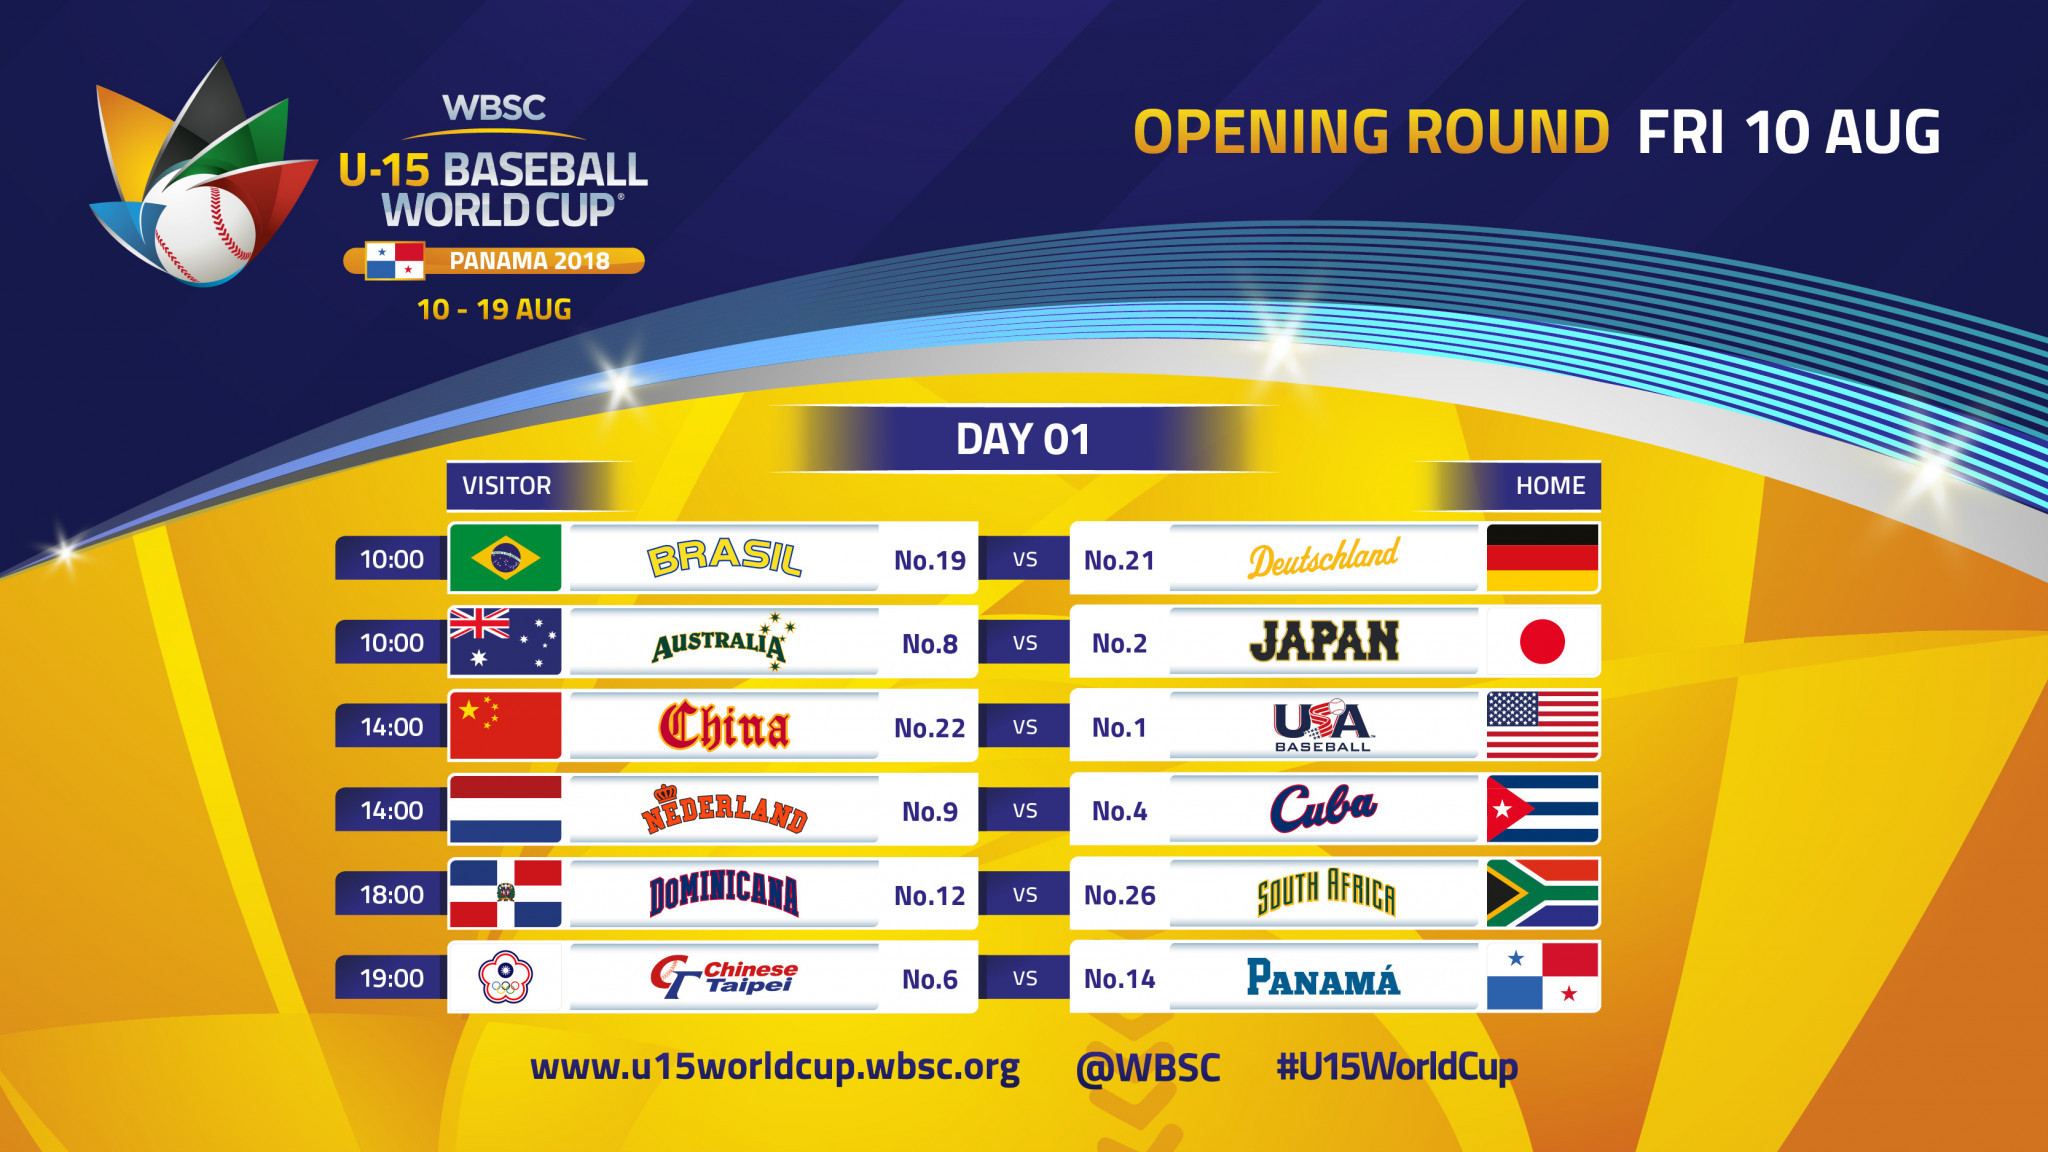 Game schedule announced for WBSC Under-15 Baseball World Cup in Panama